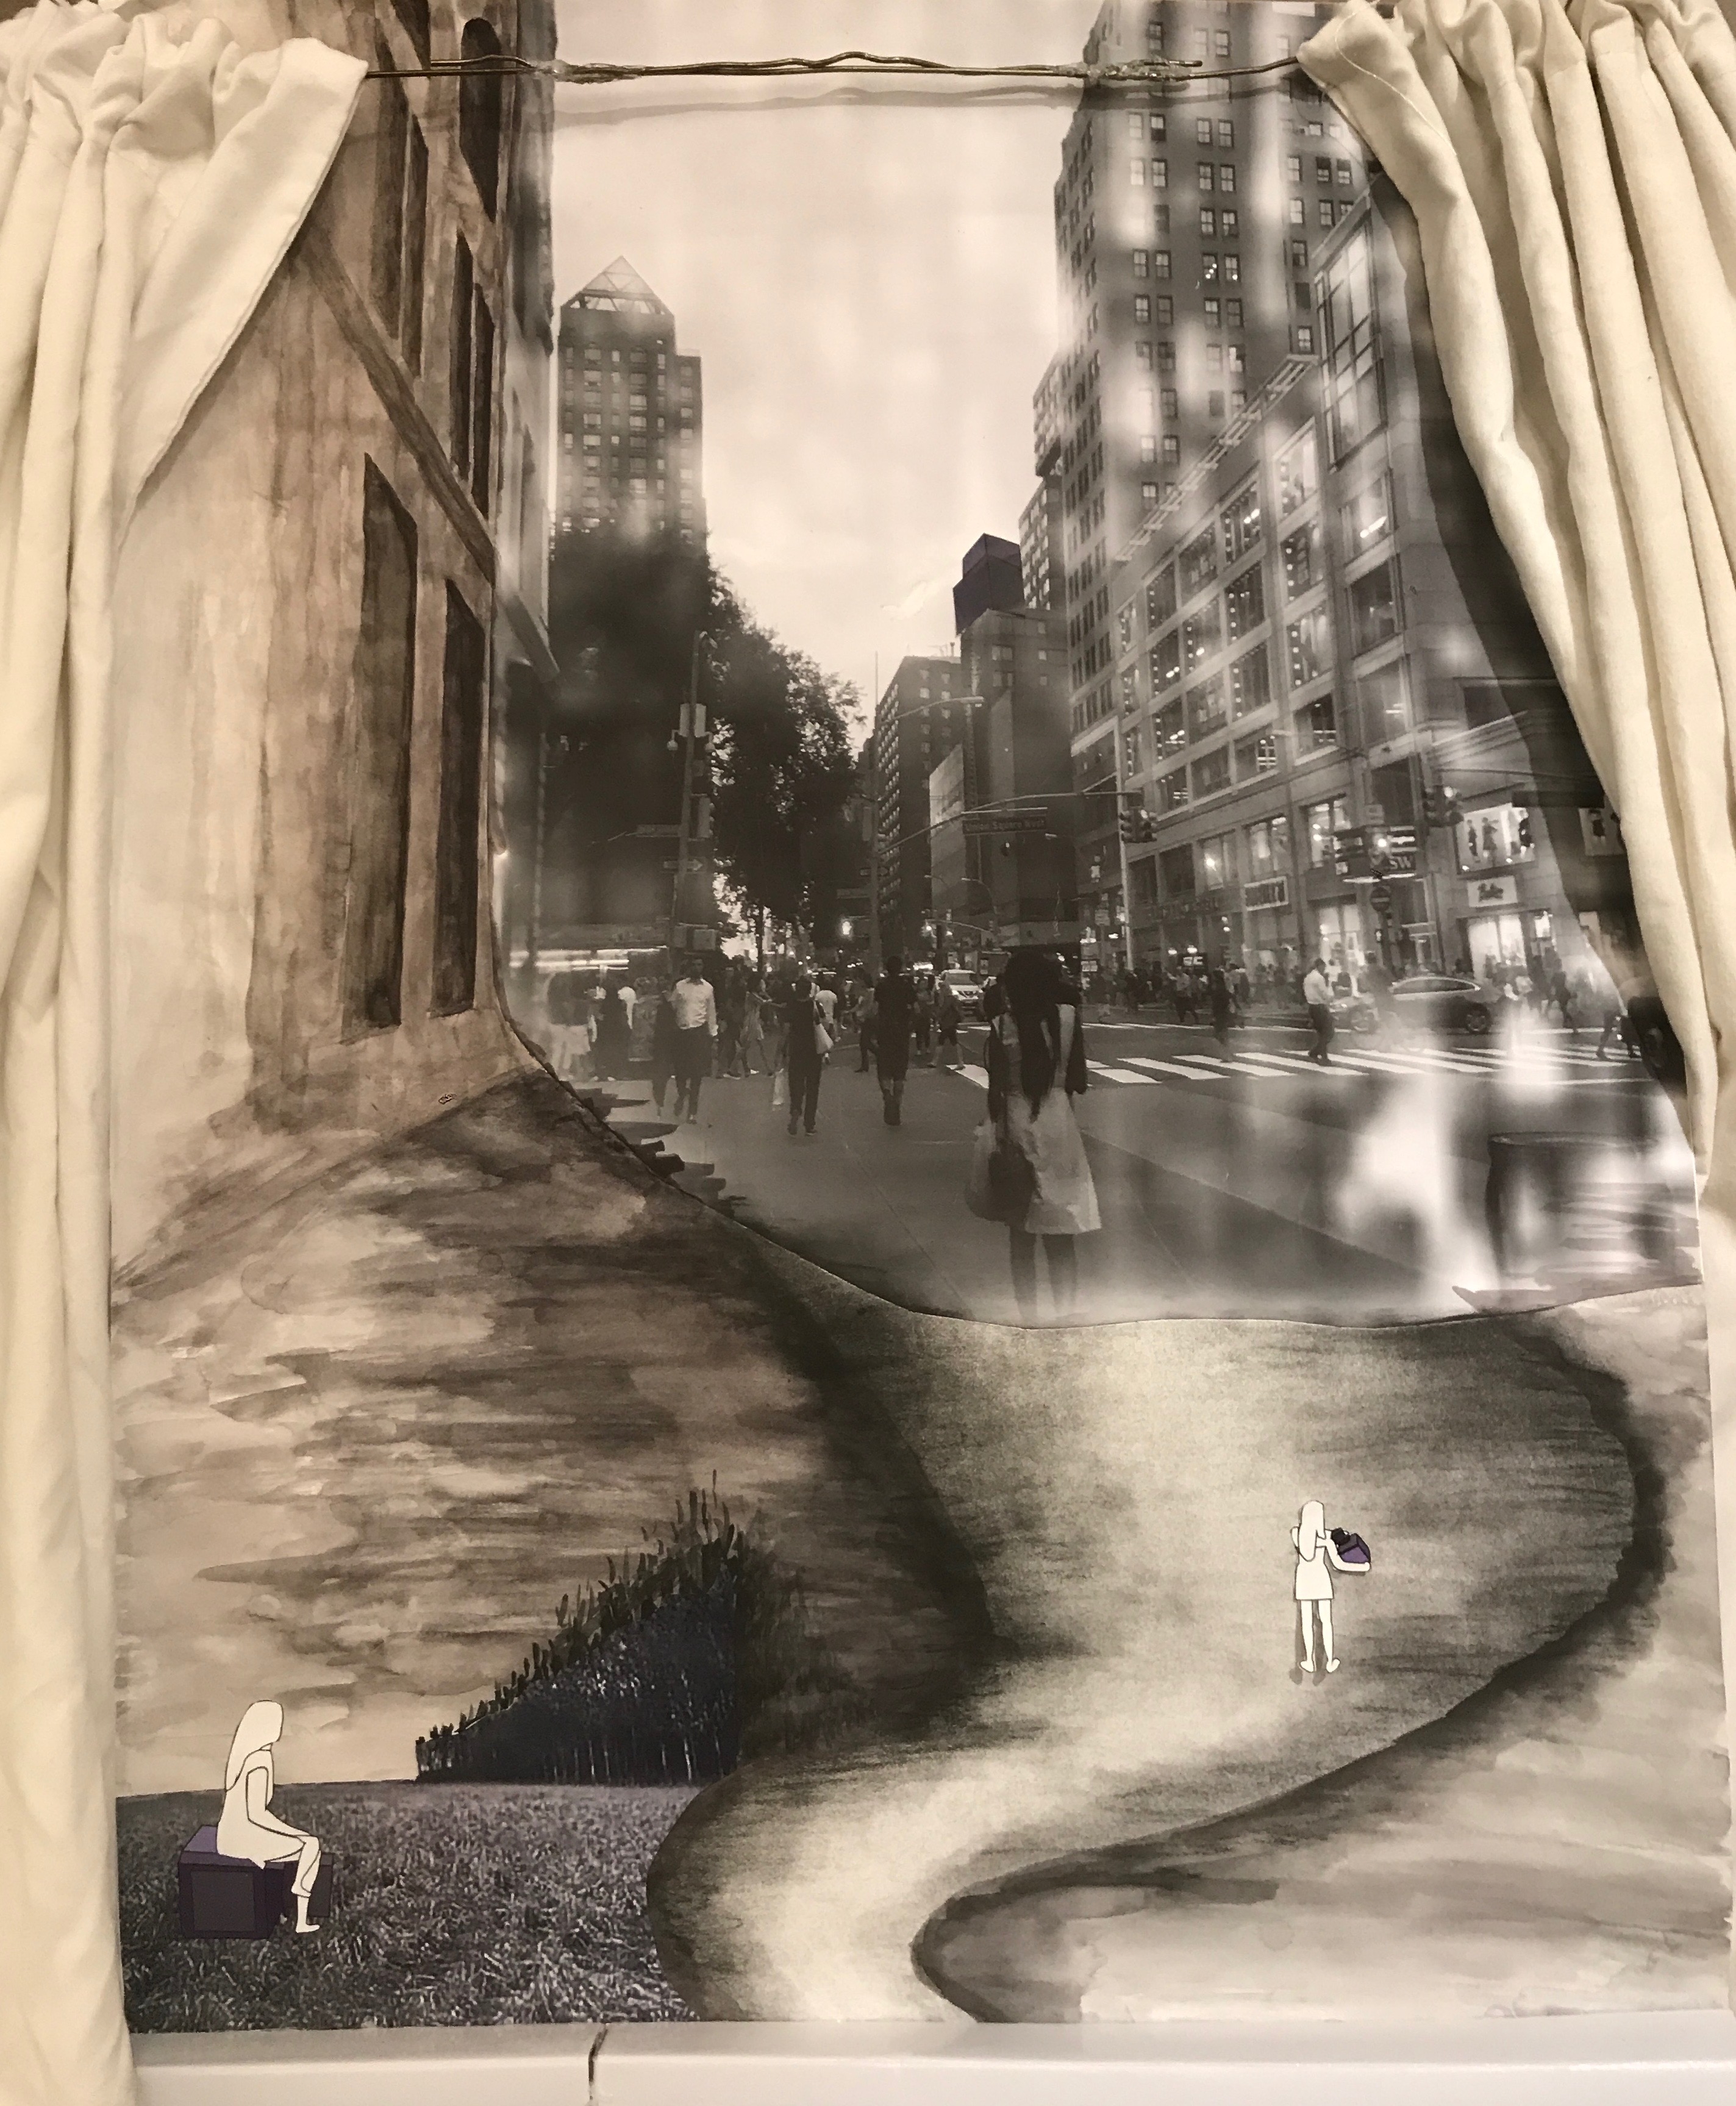 Drawing/Imaging: In Pursuit of “Intersubjective Vistas”: A Journey to My Dream